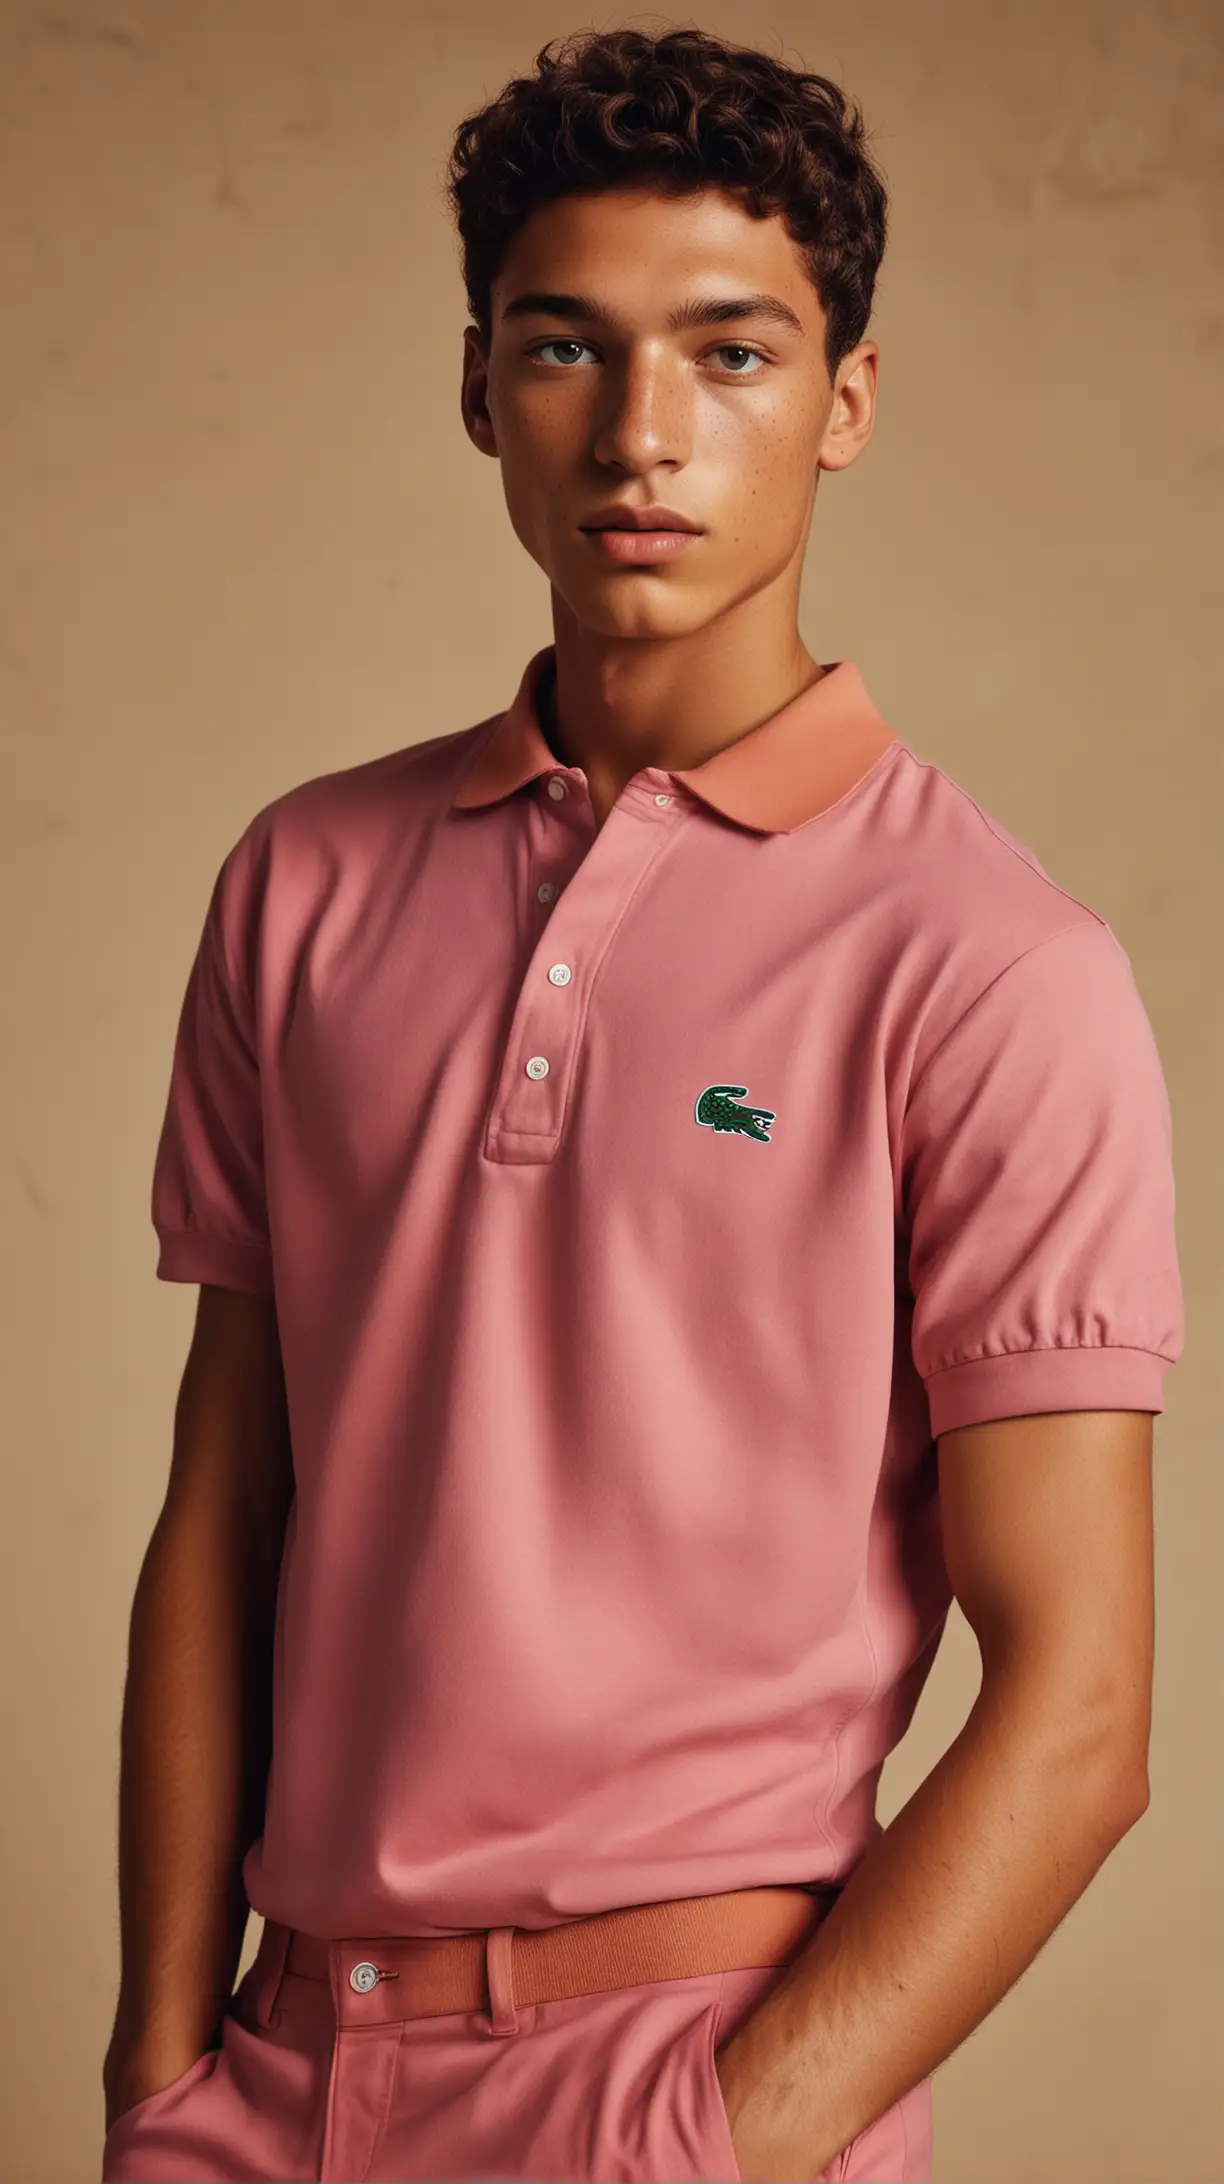 Lacoste Fashion Freckled Male Models Pose in Classic Michelangelo Style